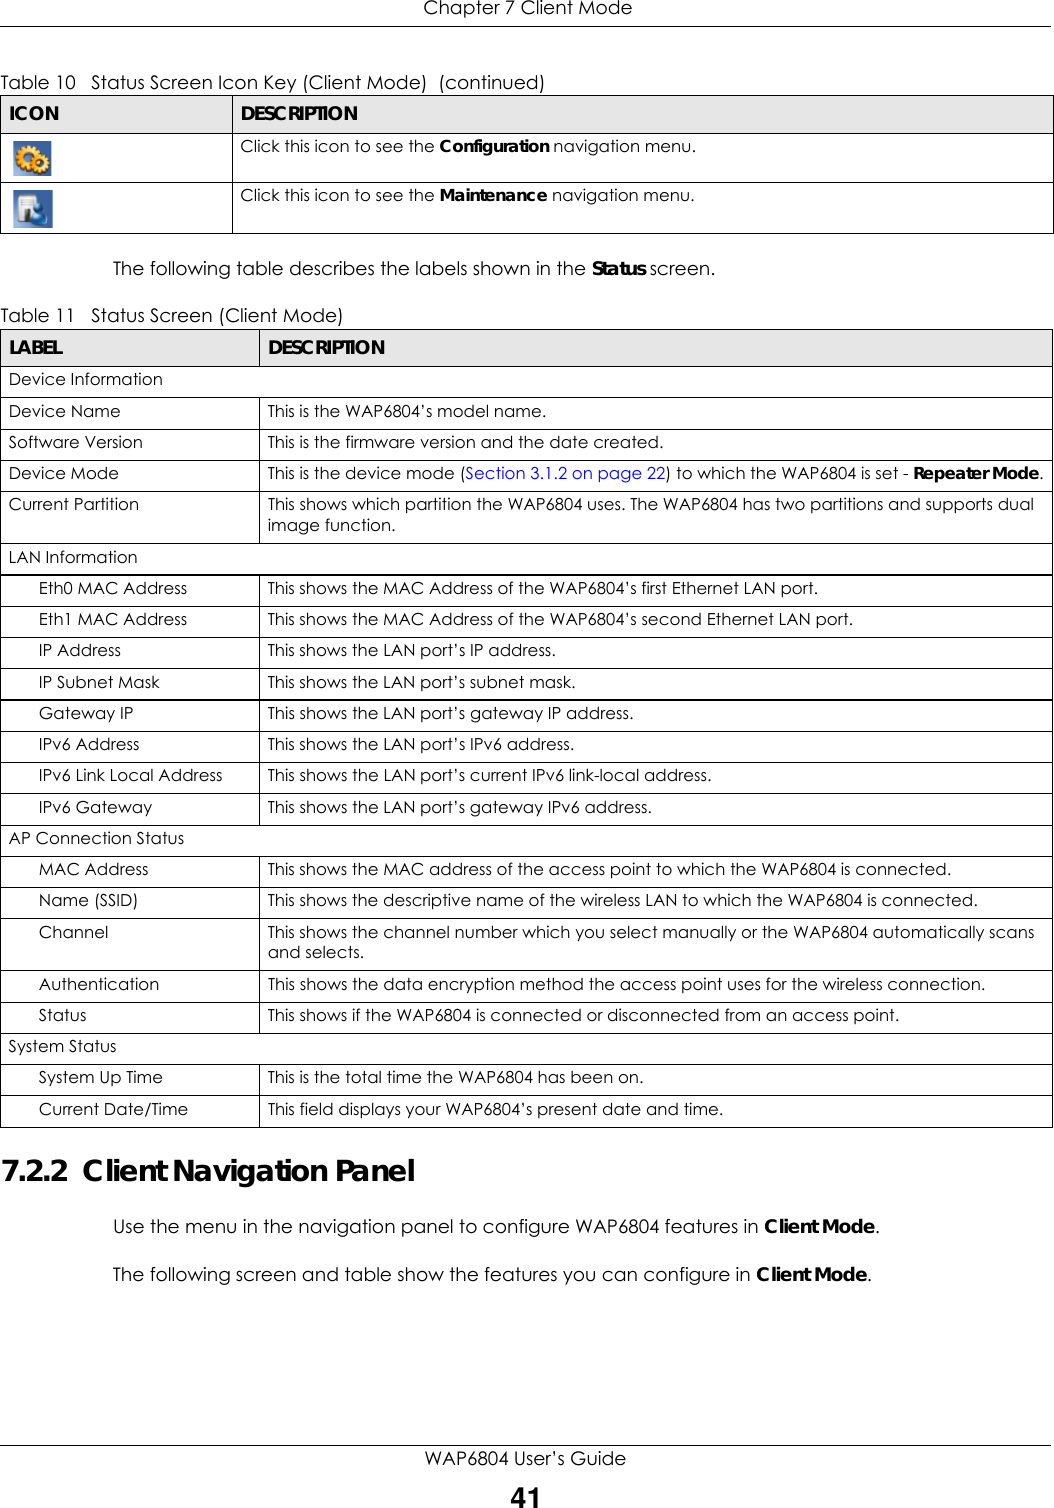  Chapter 7 Client ModeWAP6804 User’s Guide41The following table describes the labels shown in the Status screen.  7.2.2  Client Navigation PanelUse the menu in the navigation panel to configure WAP6804 features in Client Mode.The following screen and table show the features you can configure in Client Mode.Click this icon to see the Configuration navigation menu. Click this icon to see the Maintenance navigation menu. Table 10   Status Screen Icon Key (Client Mode)  (continued)ICON DESCRIPTIONTable 11   Status Screen (Client Mode) LABEL DESCRIPTIONDevice InformationDevice Name This is the WAP6804’s model name.Software Version This is the firmware version and the date created. Device Mode This is the device mode (Section 3.1.2 on page 22) to which the WAP6804 is set - Repeater Mode.Current Partition This shows which partition the WAP6804 uses. The WAP6804 has two partitions and supports dual image function.LAN InformationEth0 MAC Address This shows the MAC Address of the WAP6804’s first Ethernet LAN port.Eth1 MAC Address This shows the MAC Address of the WAP6804’s second Ethernet LAN port.IP Address This shows the LAN port’s IP address.IP Subnet Mask This shows the LAN port’s subnet mask.Gateway IP This shows the LAN port’s gateway IP address.IPv6 Address This shows the LAN port’s IPv6 address.IPv6 Link Local Address This shows the LAN port’s current IPv6 link-local address.IPv6 Gateway This shows the LAN port’s gateway IPv6 address.AP Connection StatusMAC Address This shows the MAC address of the access point to which the WAP6804 is connected.Name (SSID) This shows the descriptive name of the wireless LAN to which the WAP6804 is connected.Channel This shows the channel number which you select manually or the WAP6804 automatically scans and selects.Authentication This shows the data encryption method the access point uses for the wireless connection.Status This shows if the WAP6804 is connected or disconnected from an access point.System StatusSystem Up Time This is the total time the WAP6804 has been on.Current Date/Time This field displays your WAP6804’s present date and time.